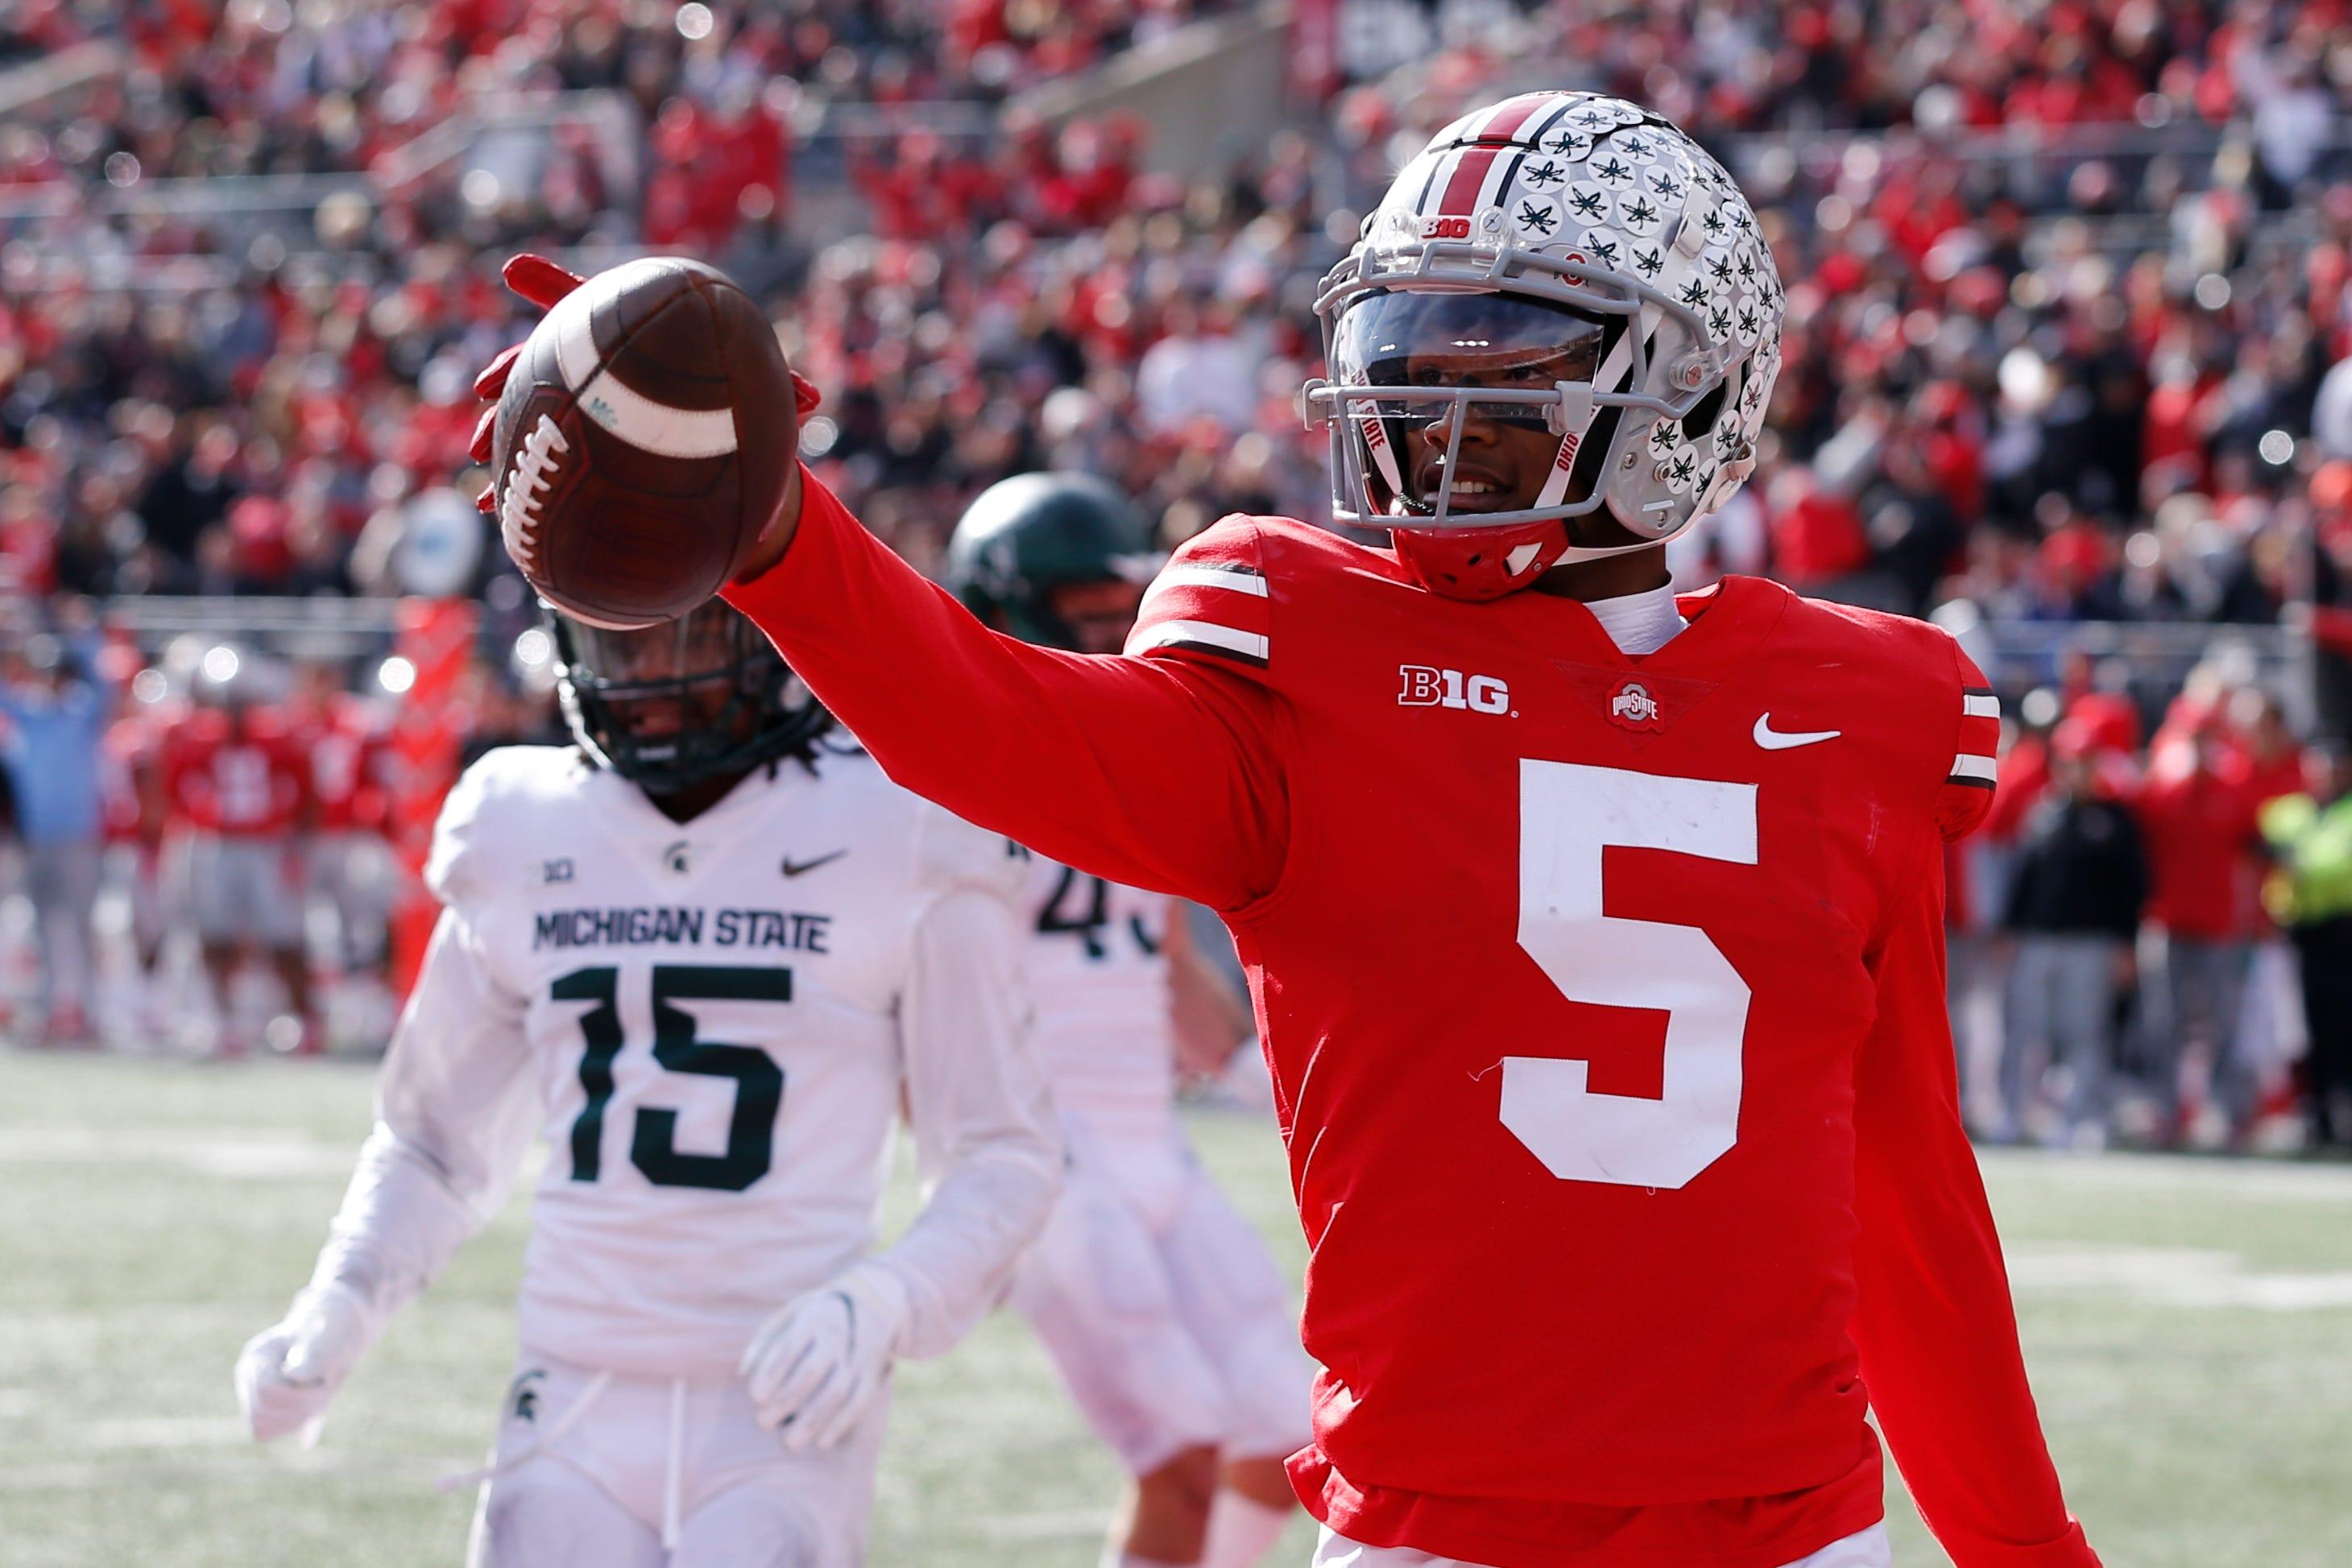 Ohio State receiver Garrett Wilson celebrates his touchdown against Michigan State during the first half of an NCAA college football game Saturday, Nov. 20, 2021, in Columbus, Ohio. (AP Photo/Jay LaPrete)